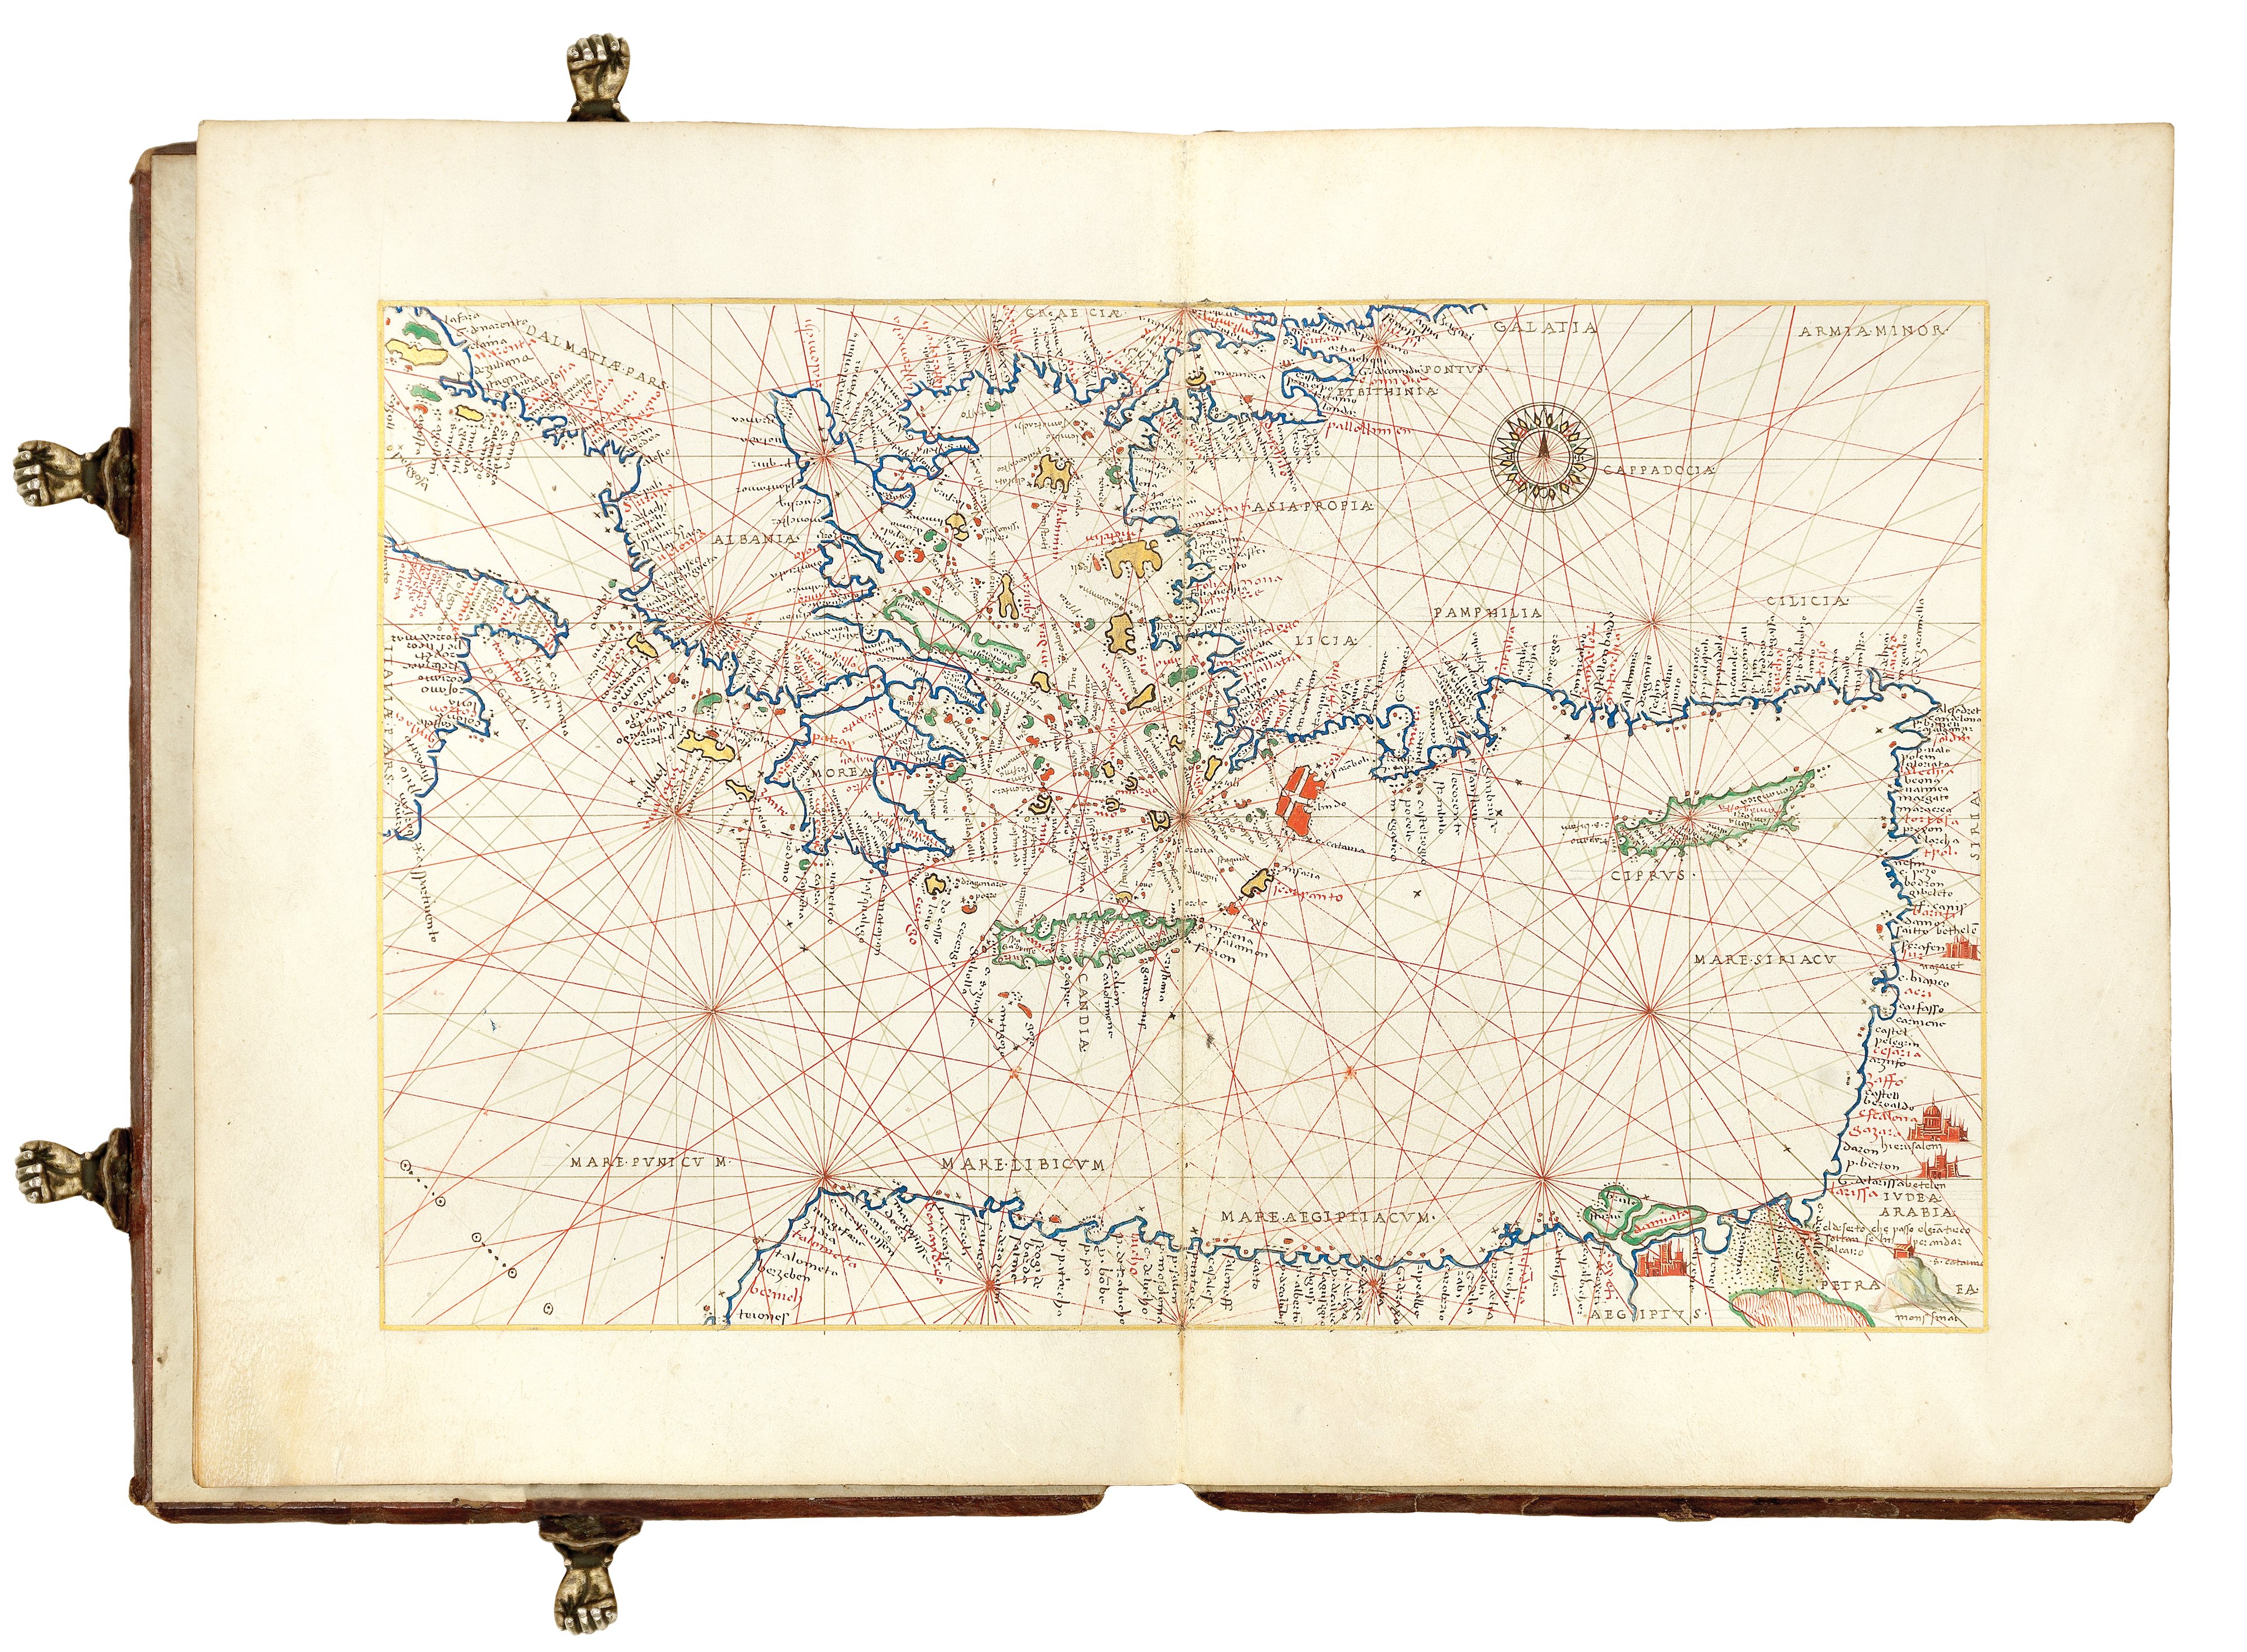 Portolan map of the Mediterranean, showing the outline of the coasts and the Sea crisscrossed by lines. A compass rose is in the Sea, and some of the islands are coloured. Hand painted on vellum. 